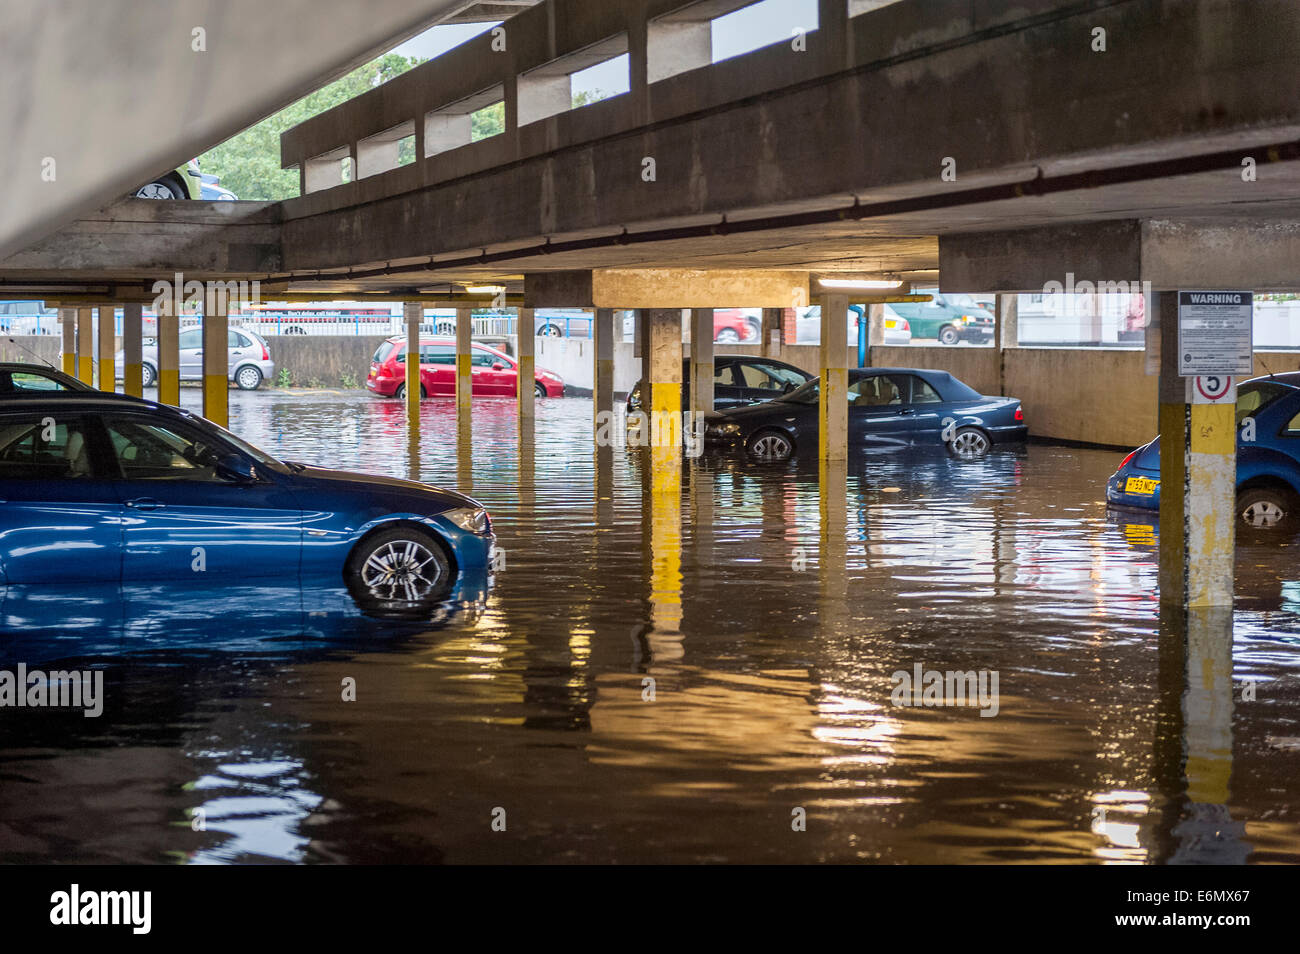 Aquarena swimming pool car park flooded by flash storm in Worthing, West Sussex, UK Stock Photo